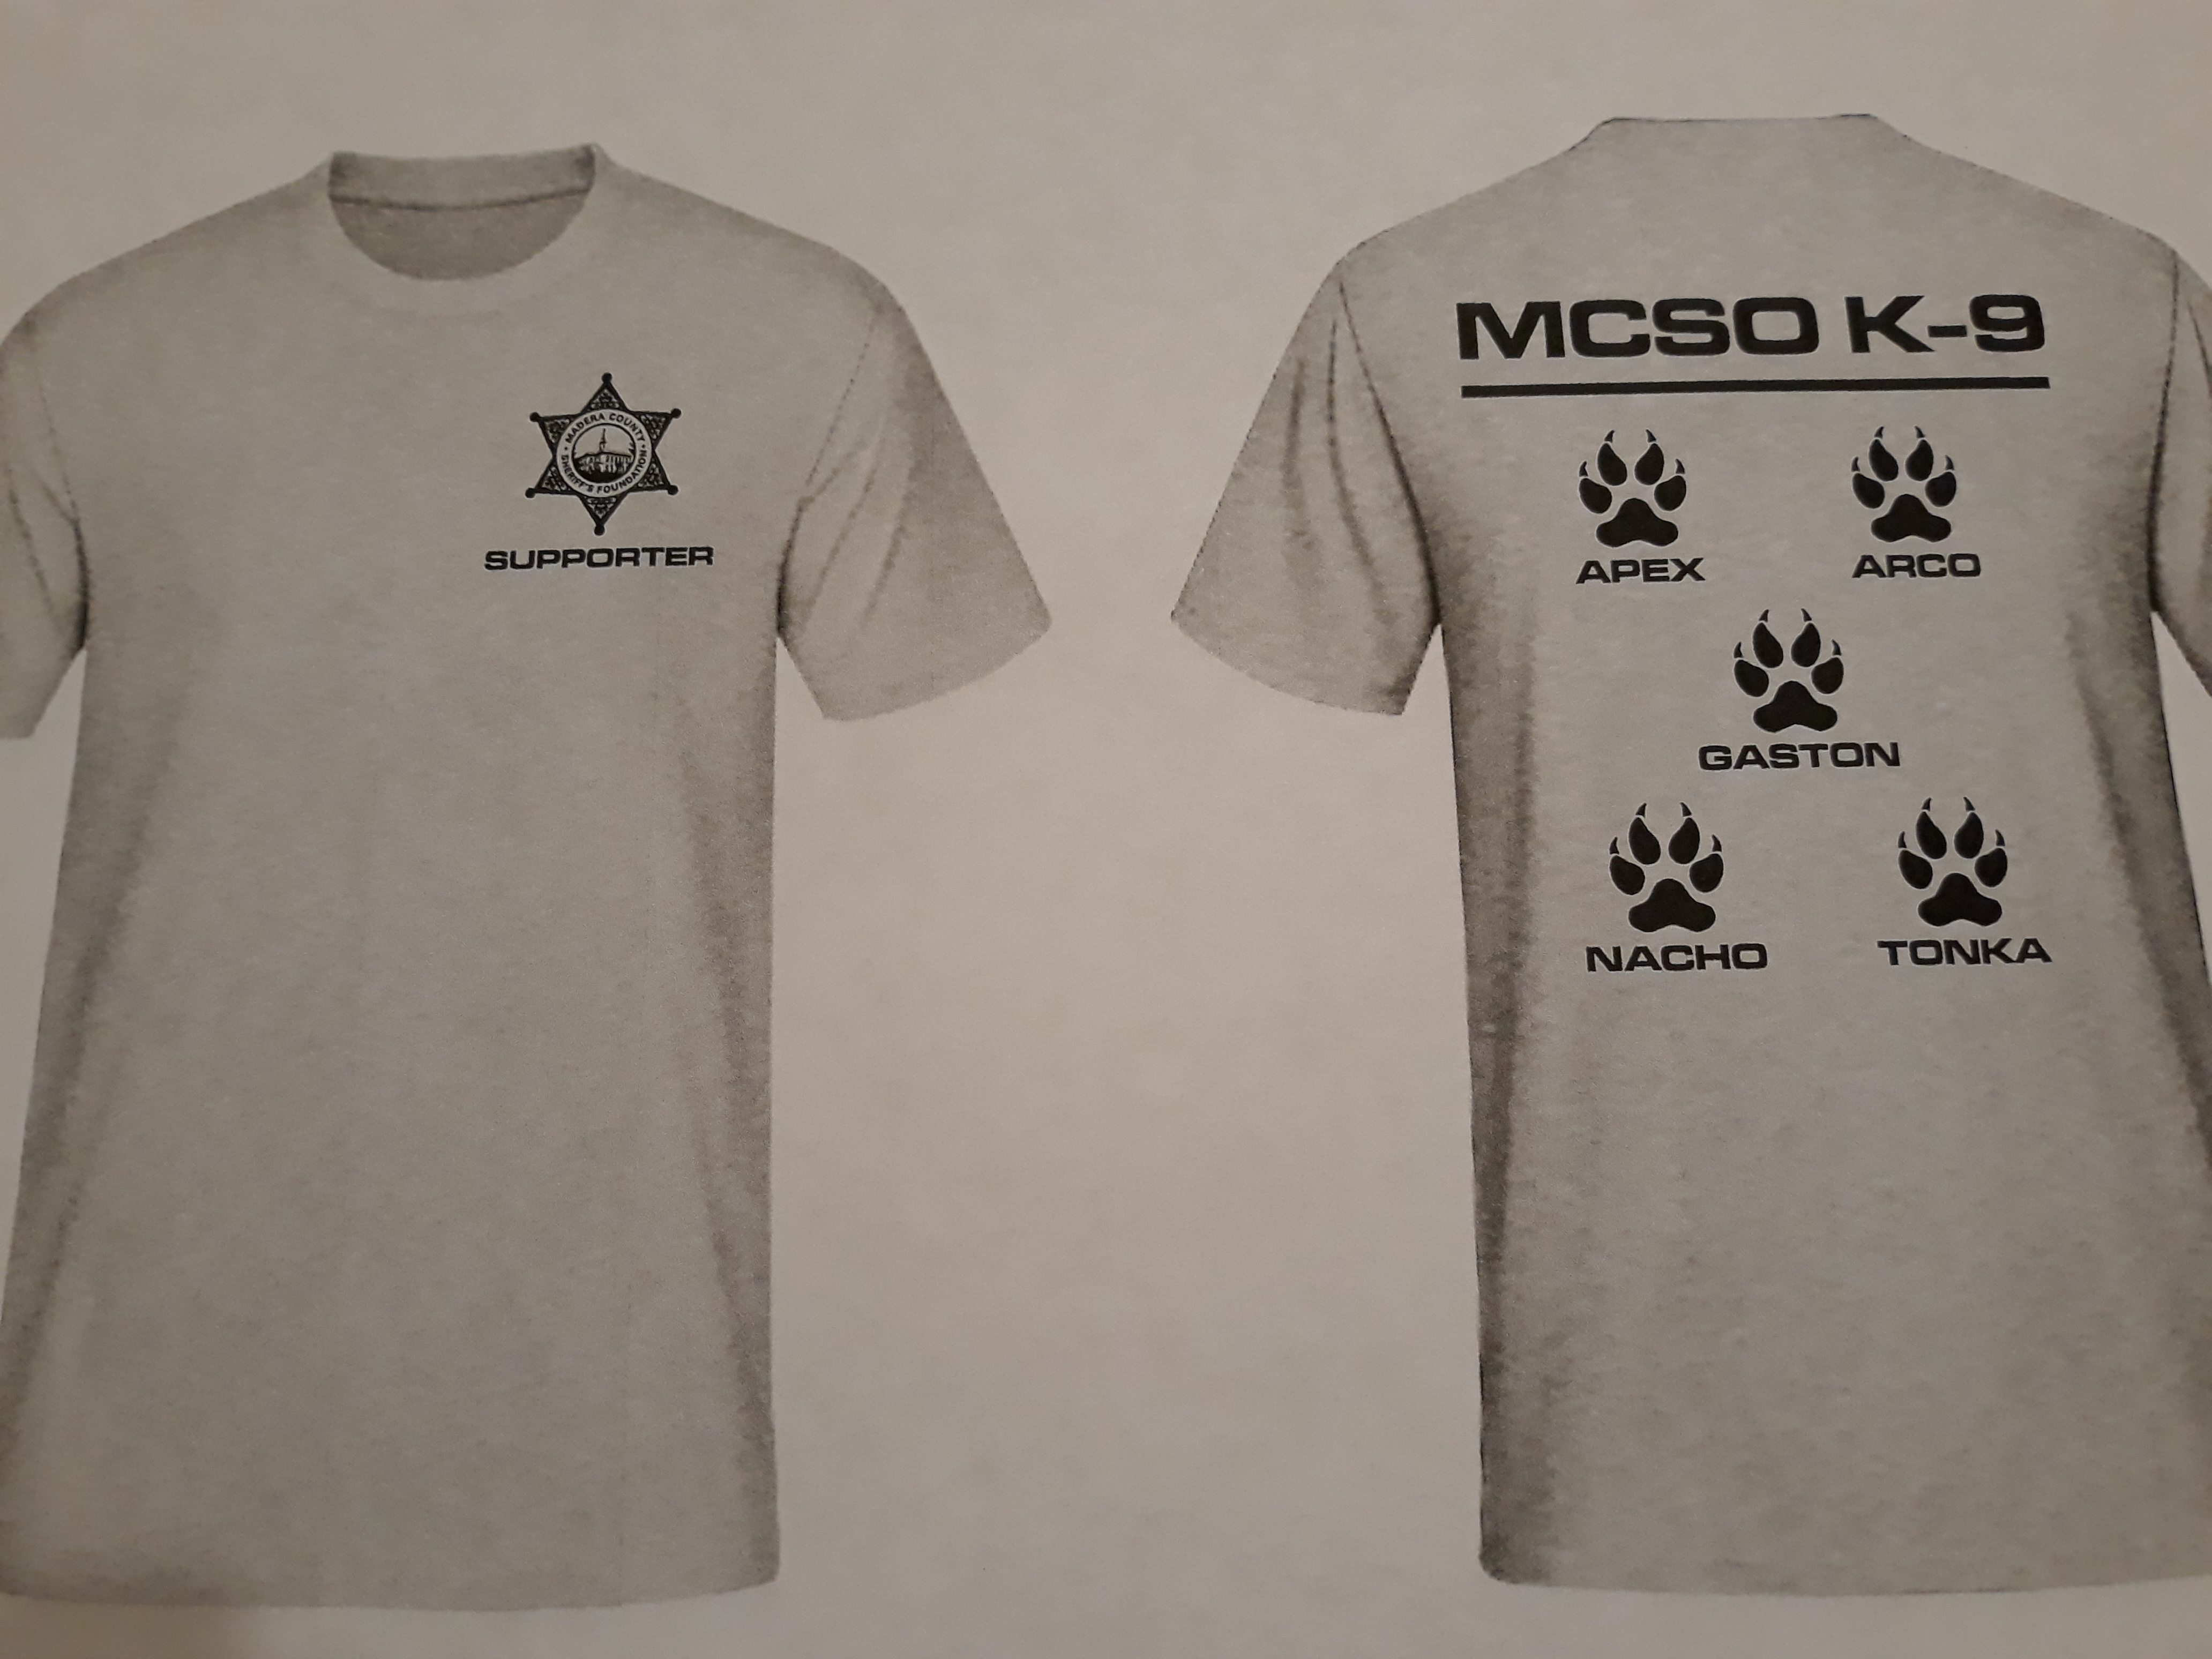 Limited Edition K-9 T-shirts!